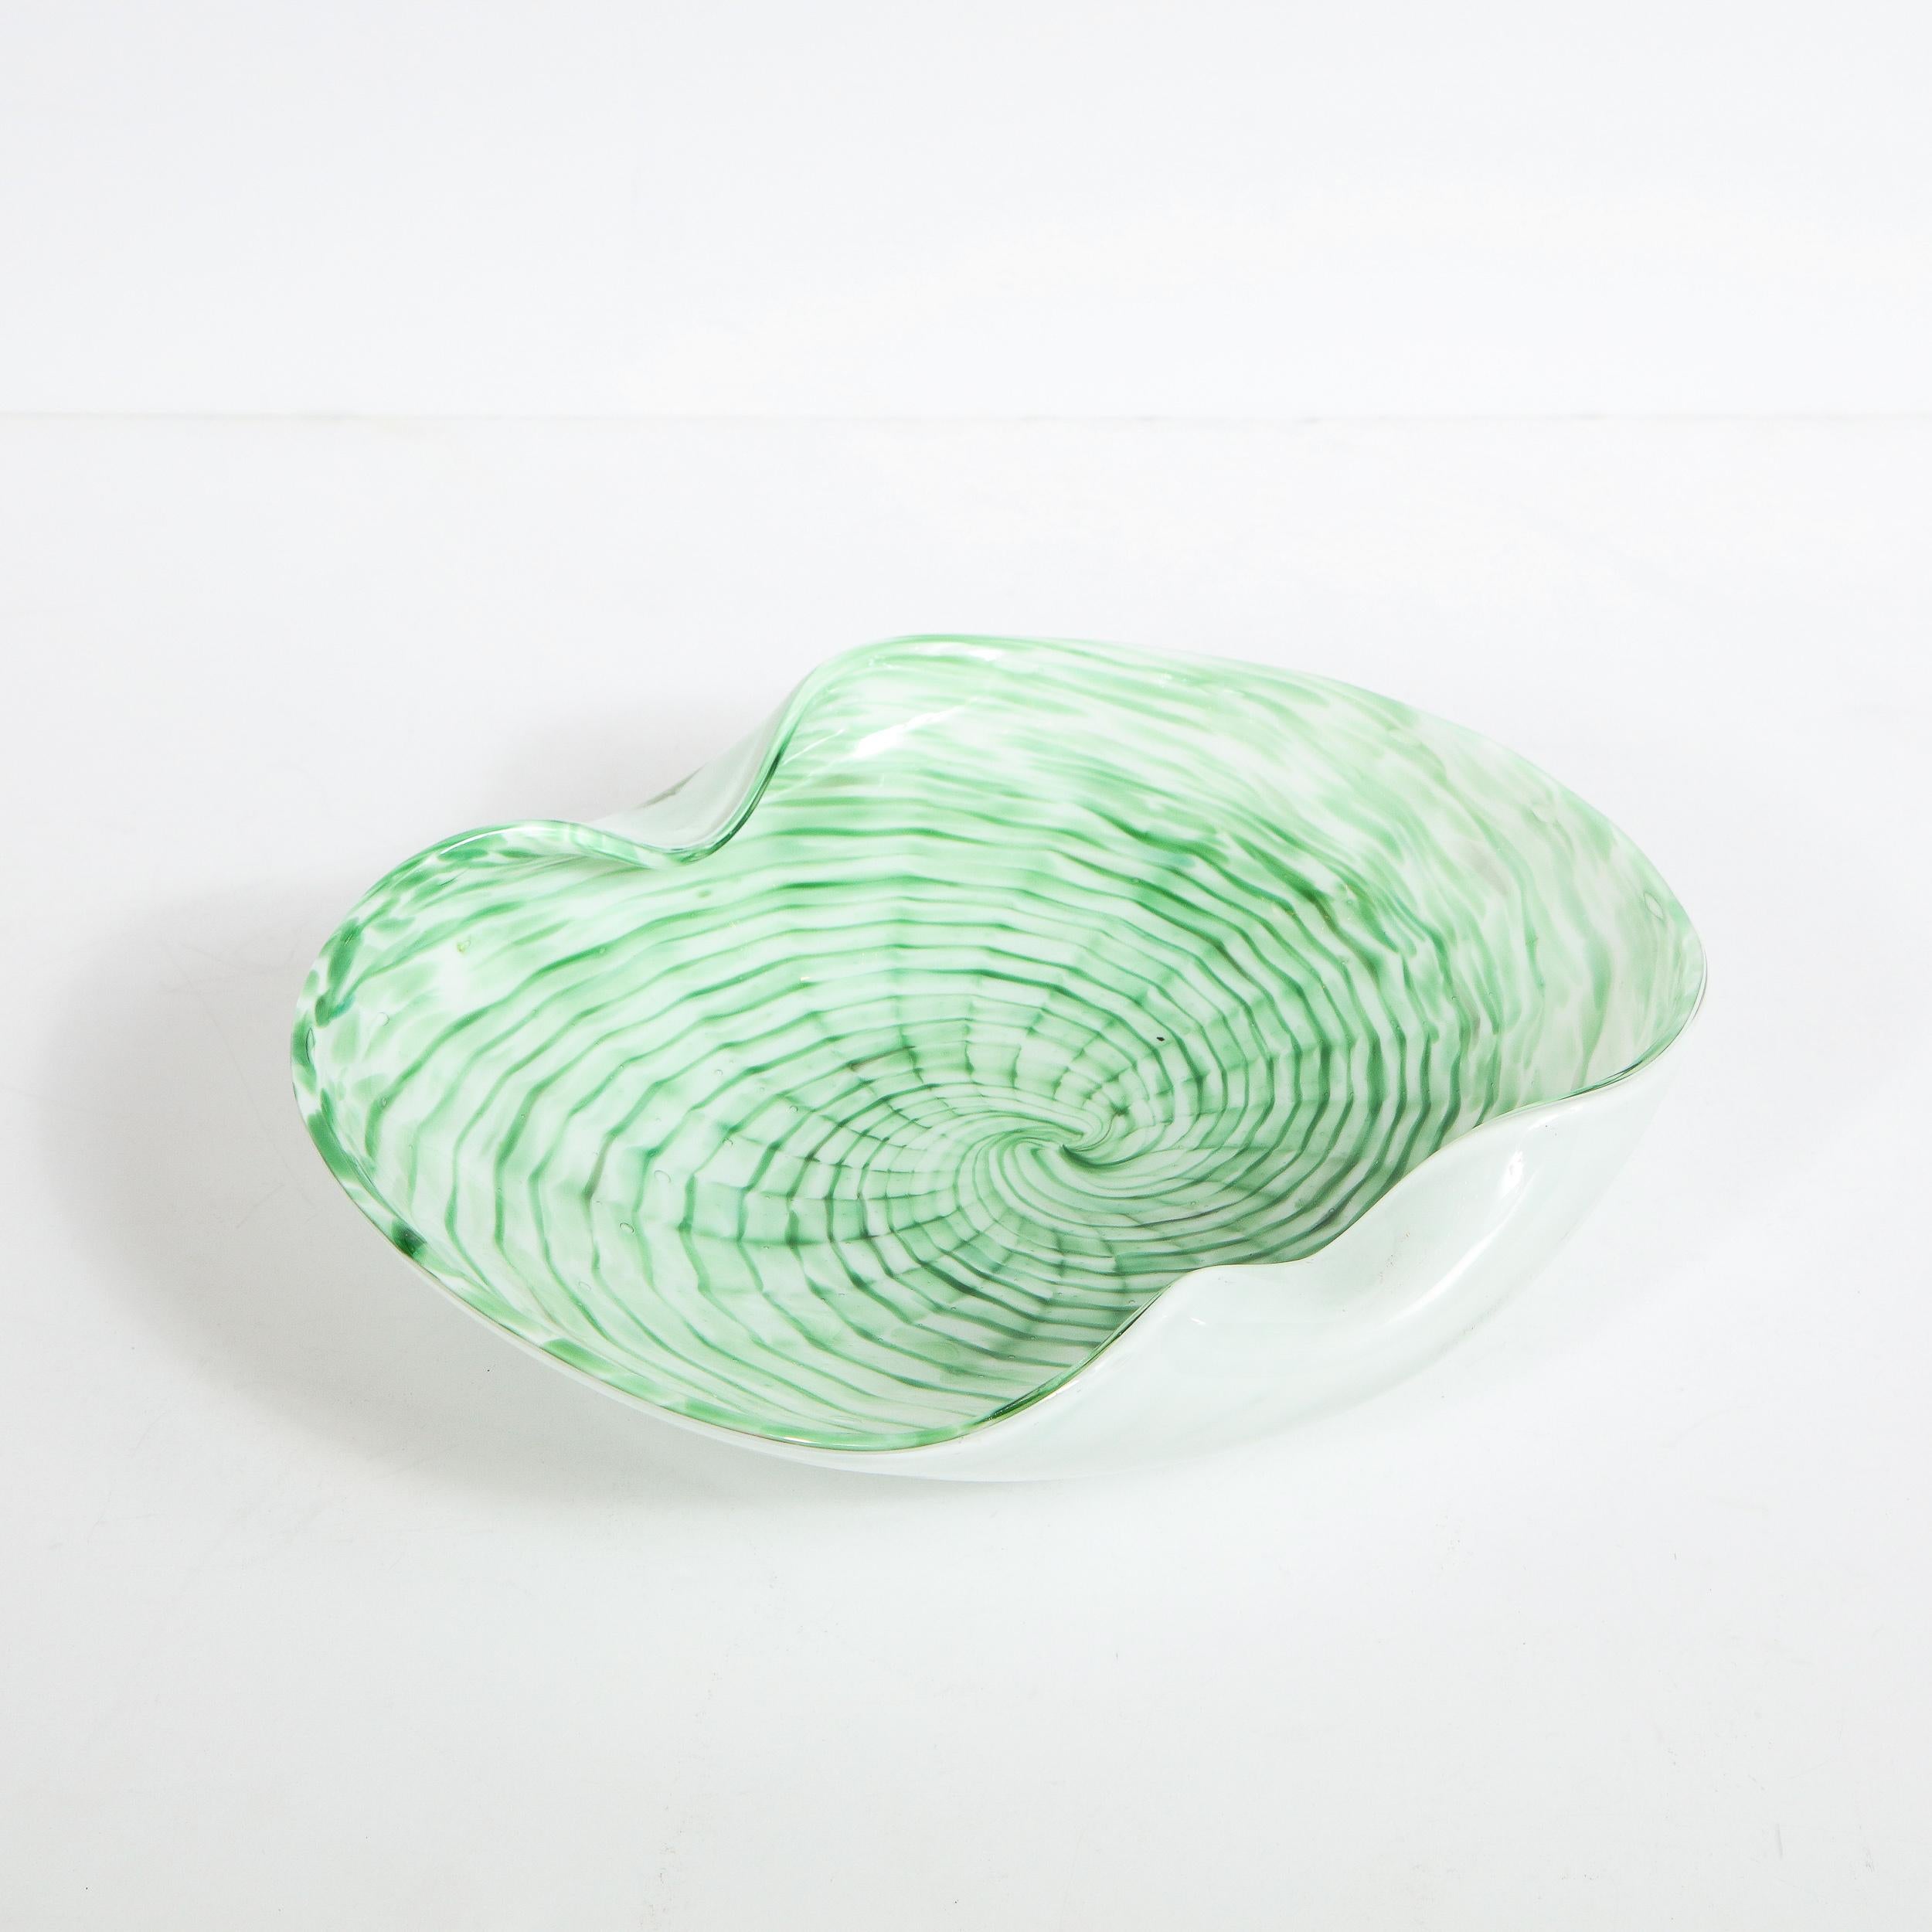 This elegant Mid-Century Modern decorative bowl was hand blown in Murano, Italy- the island off the coast of Venice renowned for centuries for its superlative glass production. It offers a circular form with two indented ends. Its outside is